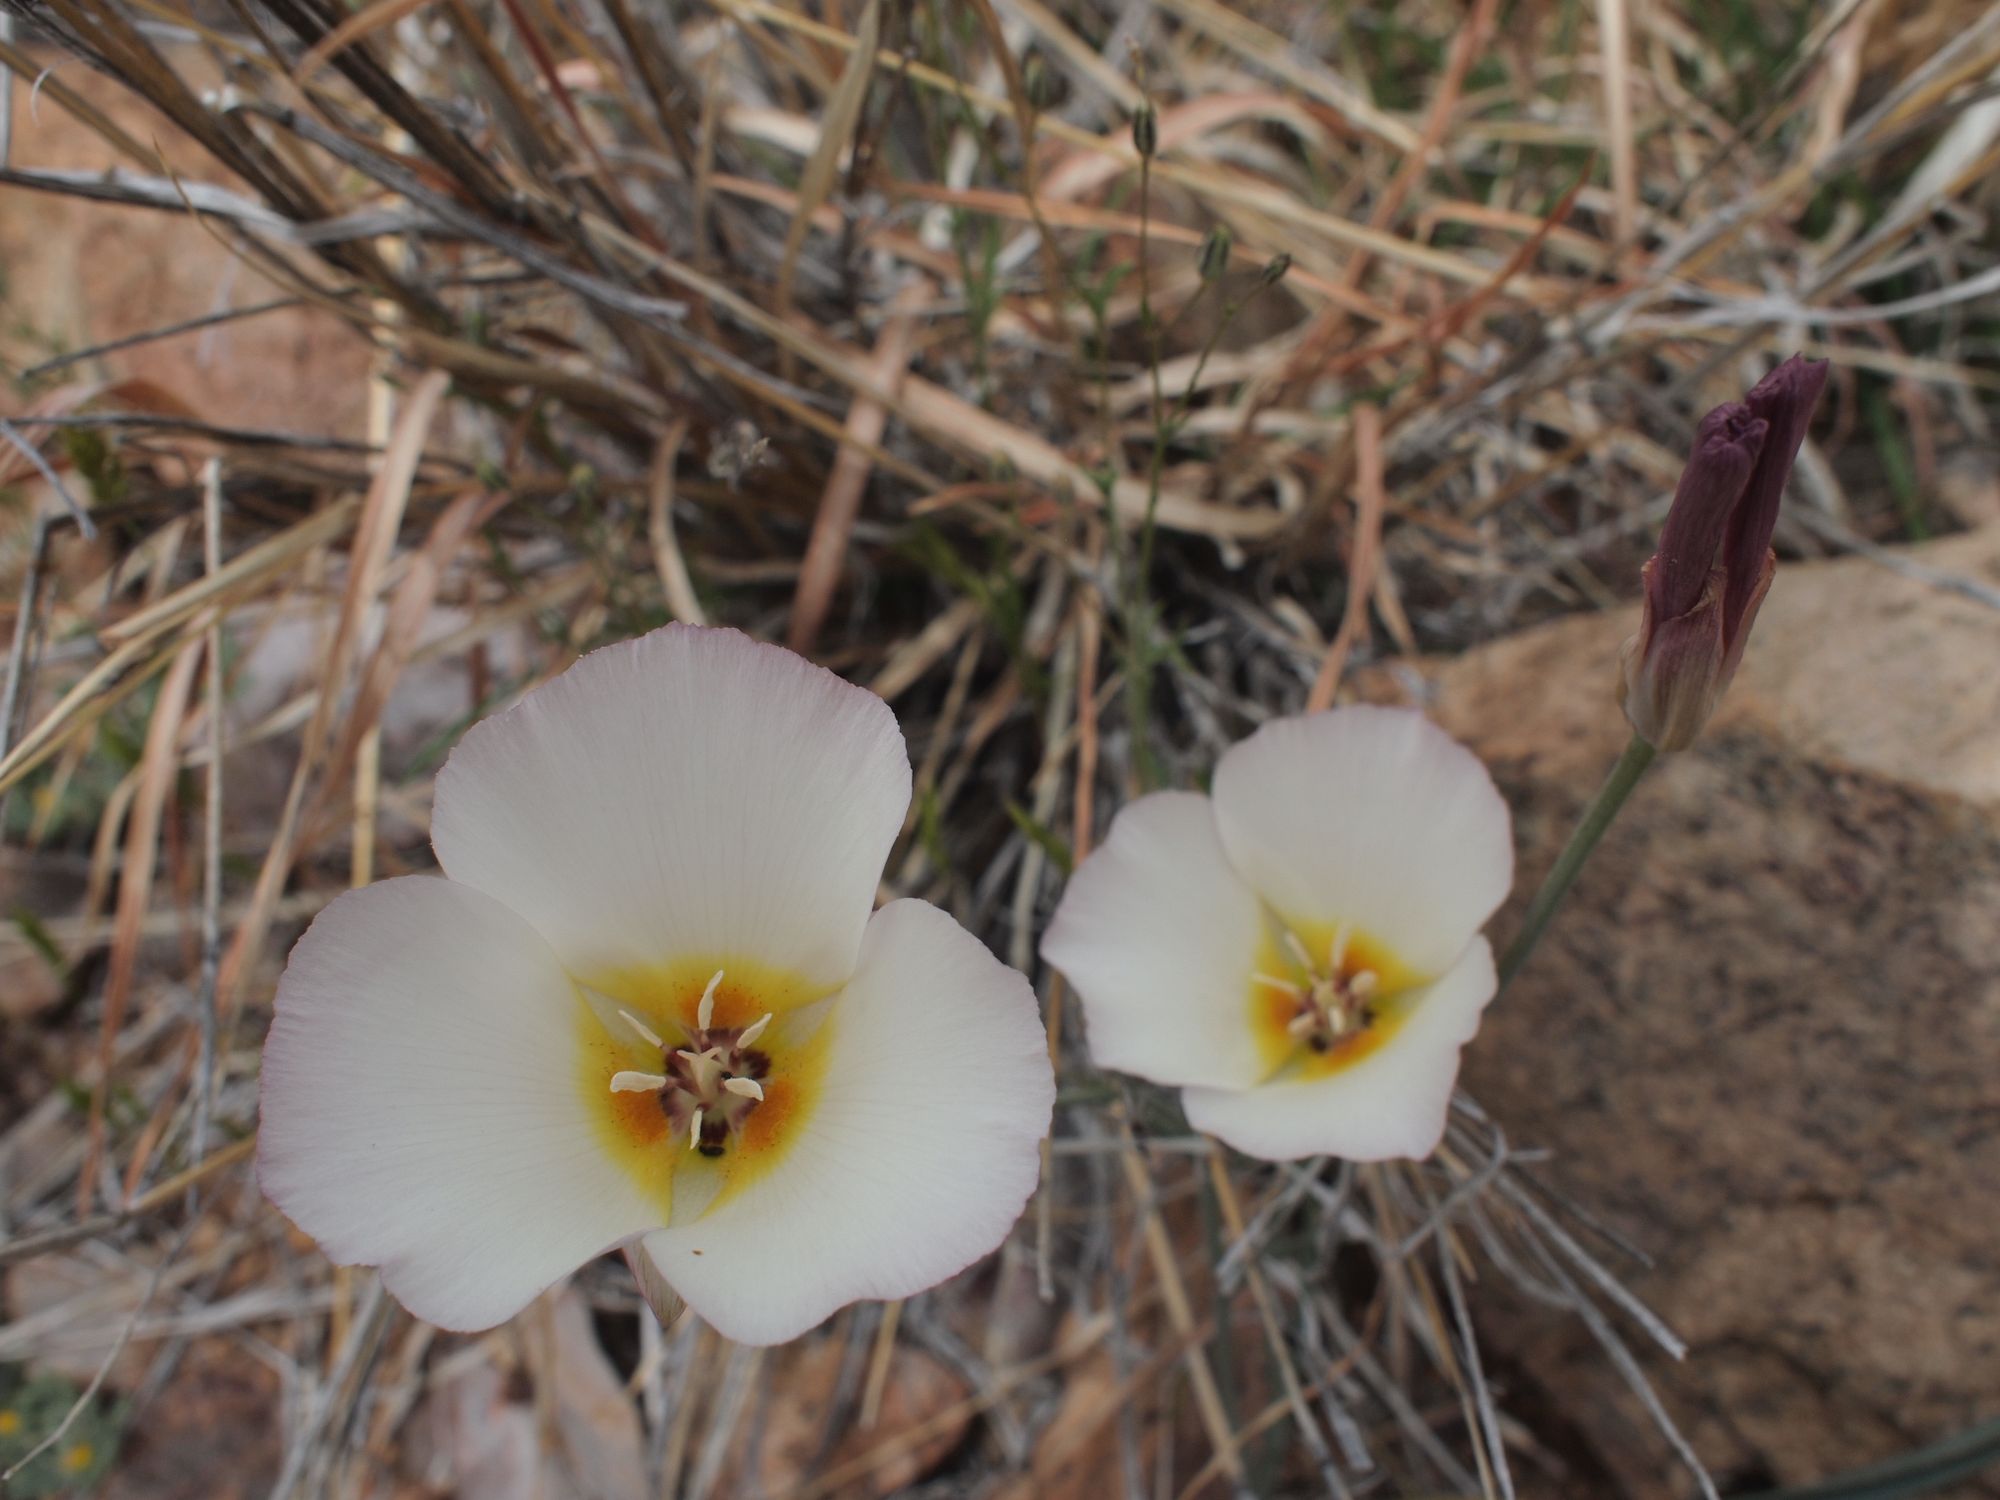 Two white mariposa lily flowers with three petals and yellow and orange centers